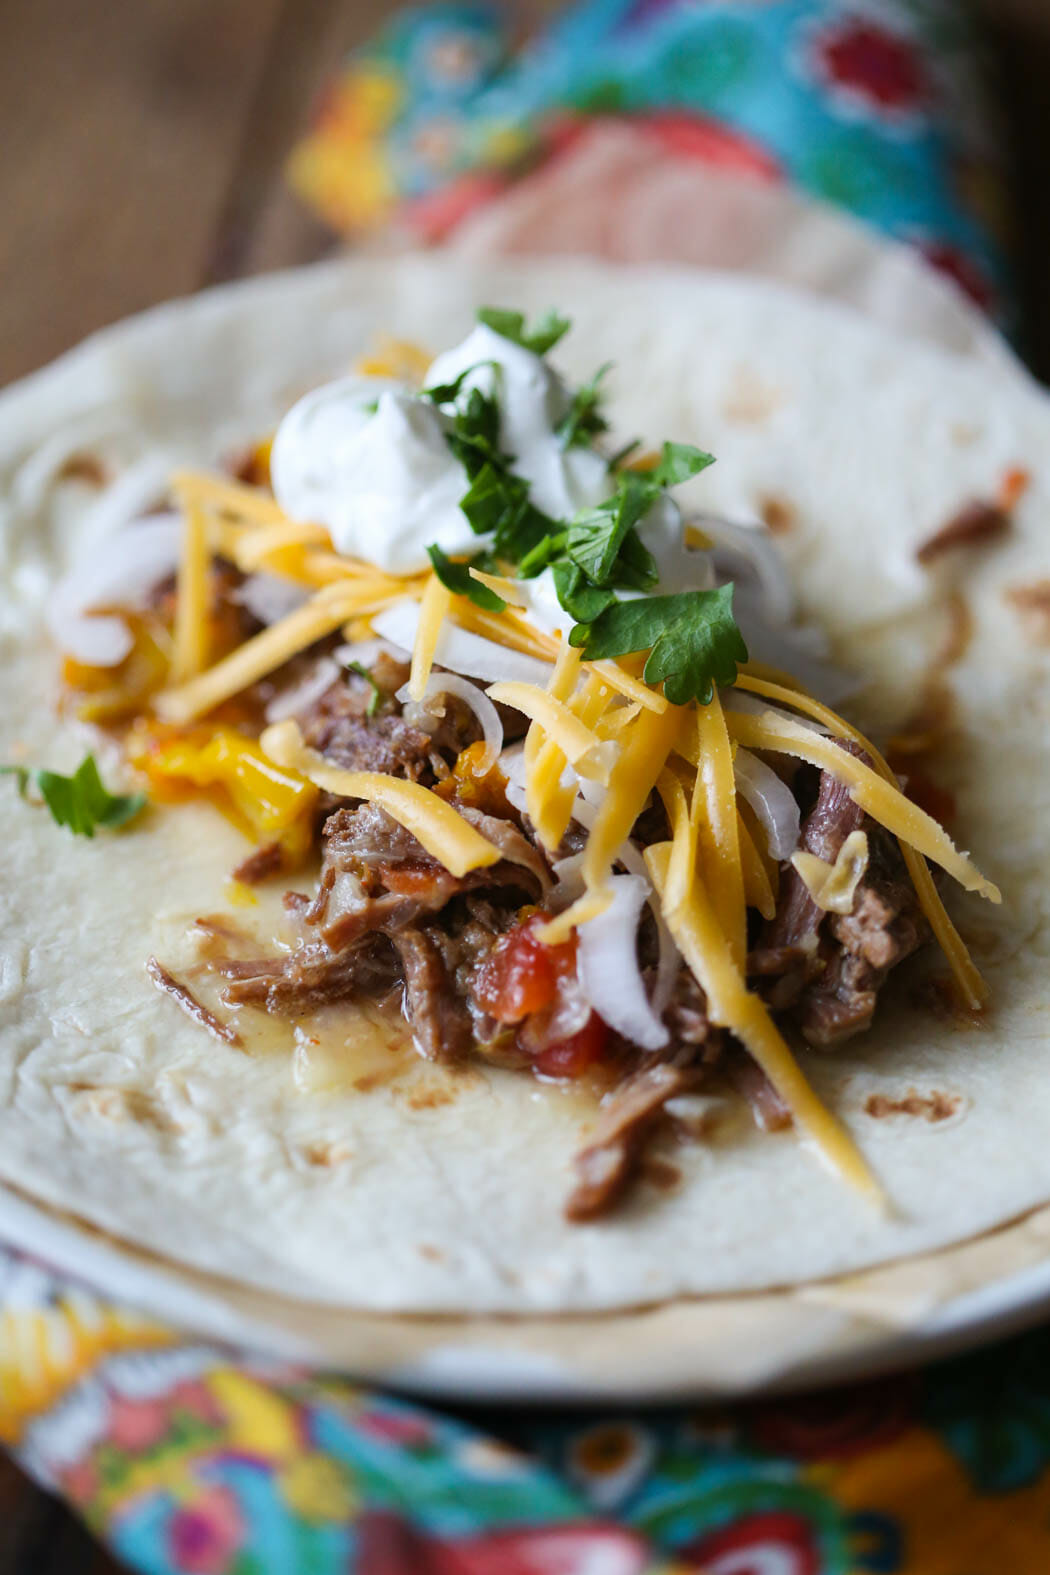 Southwestern Beef Wraps from Our Best Bites